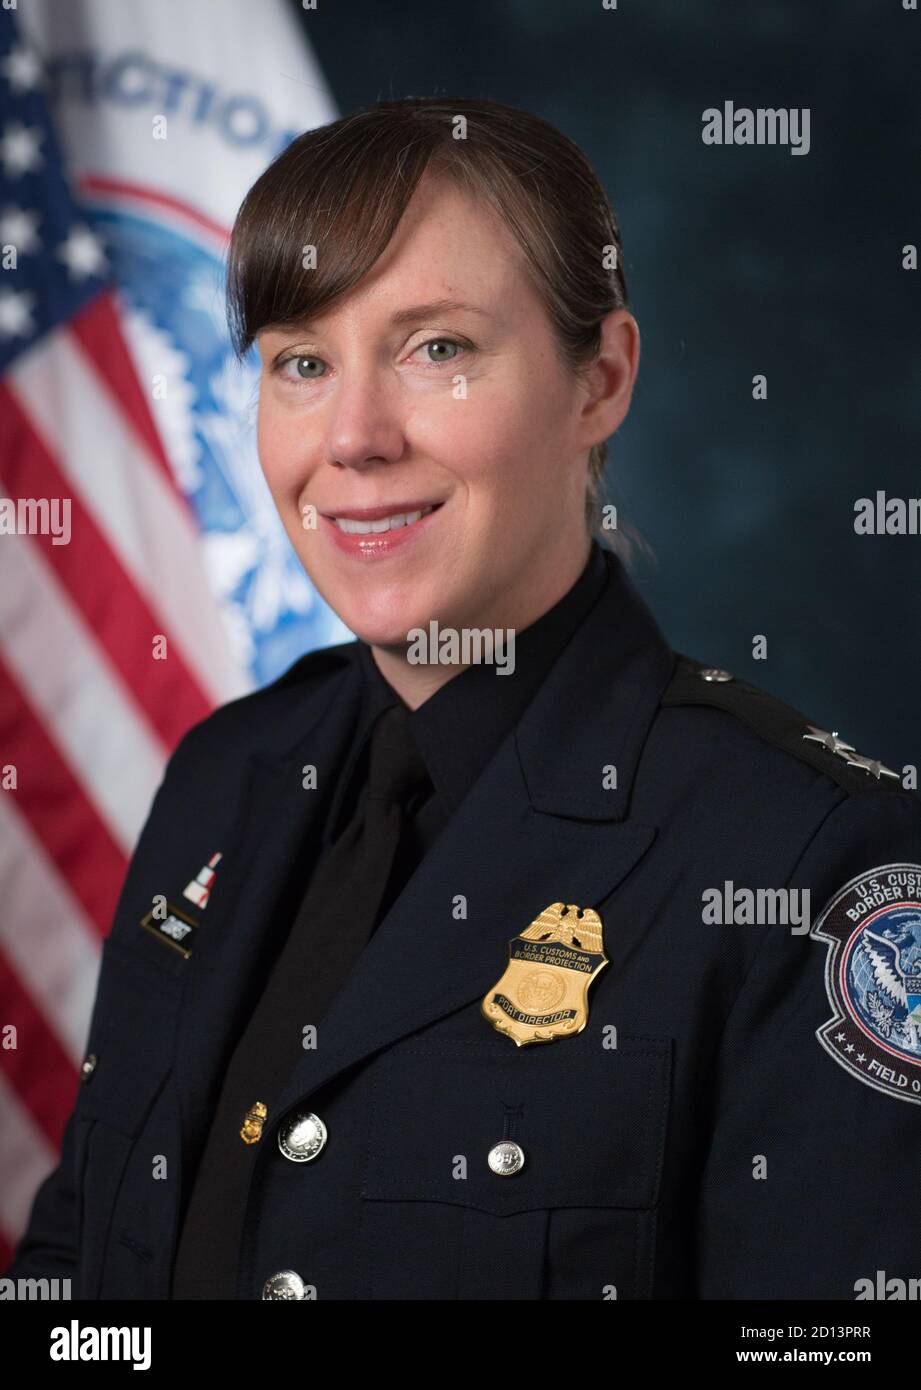 Casey Durst, official portrait, Jan. 13, 2017. U.S. Customs and Border Protection Stock Photo